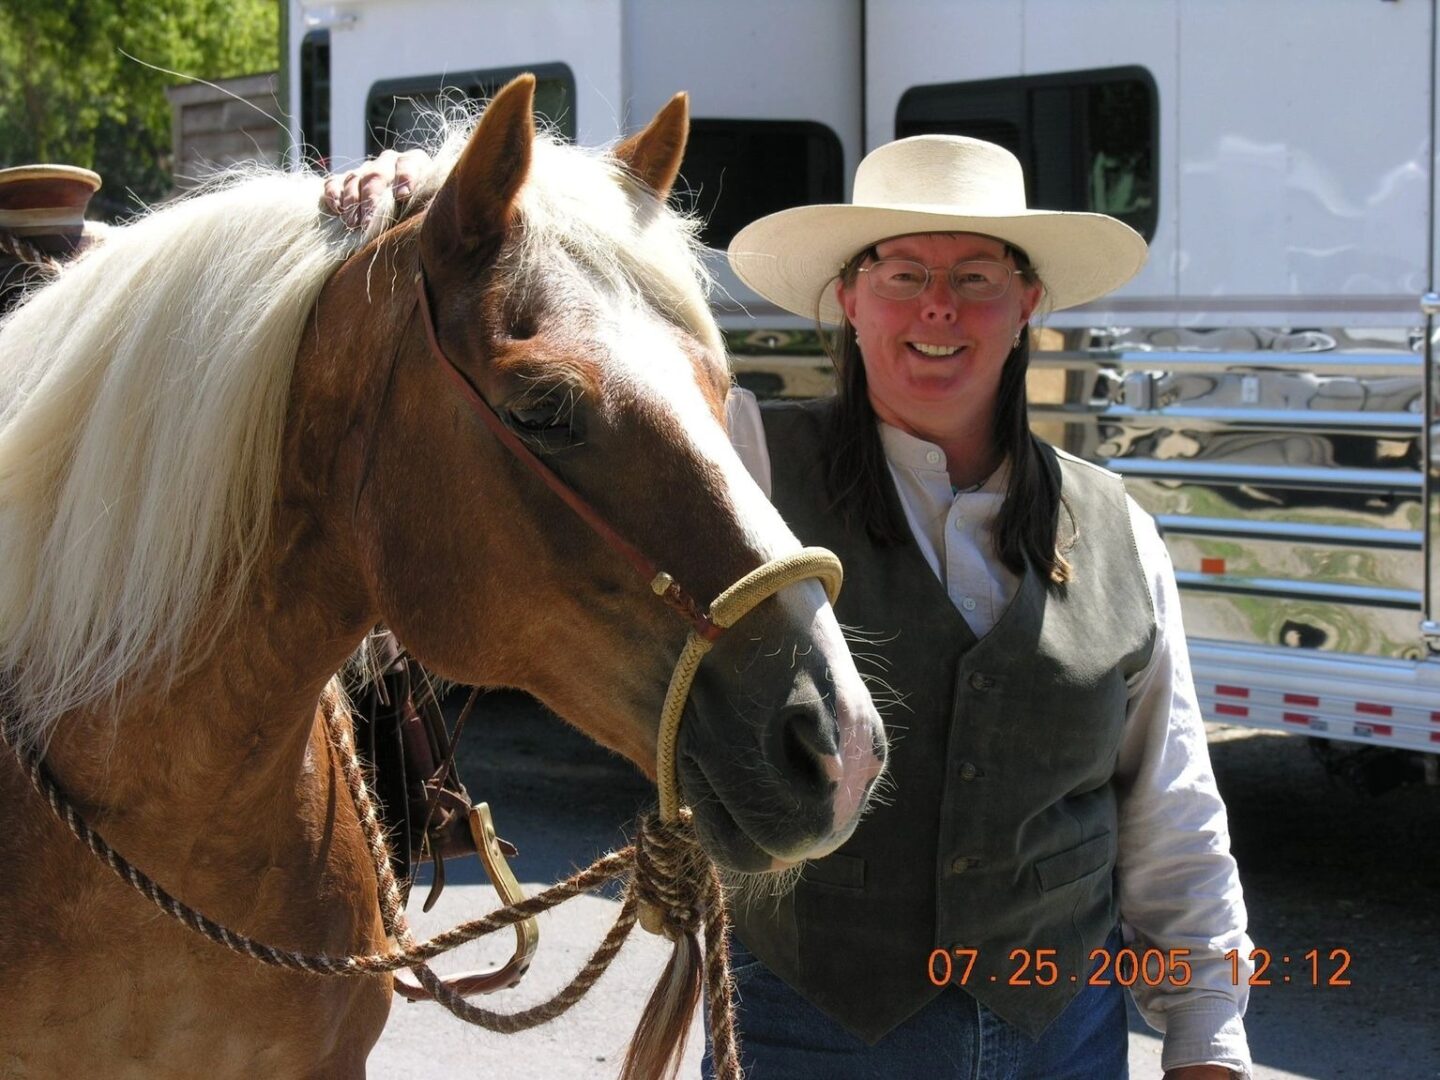 A woman in a cowboy hat standing next to a horse.